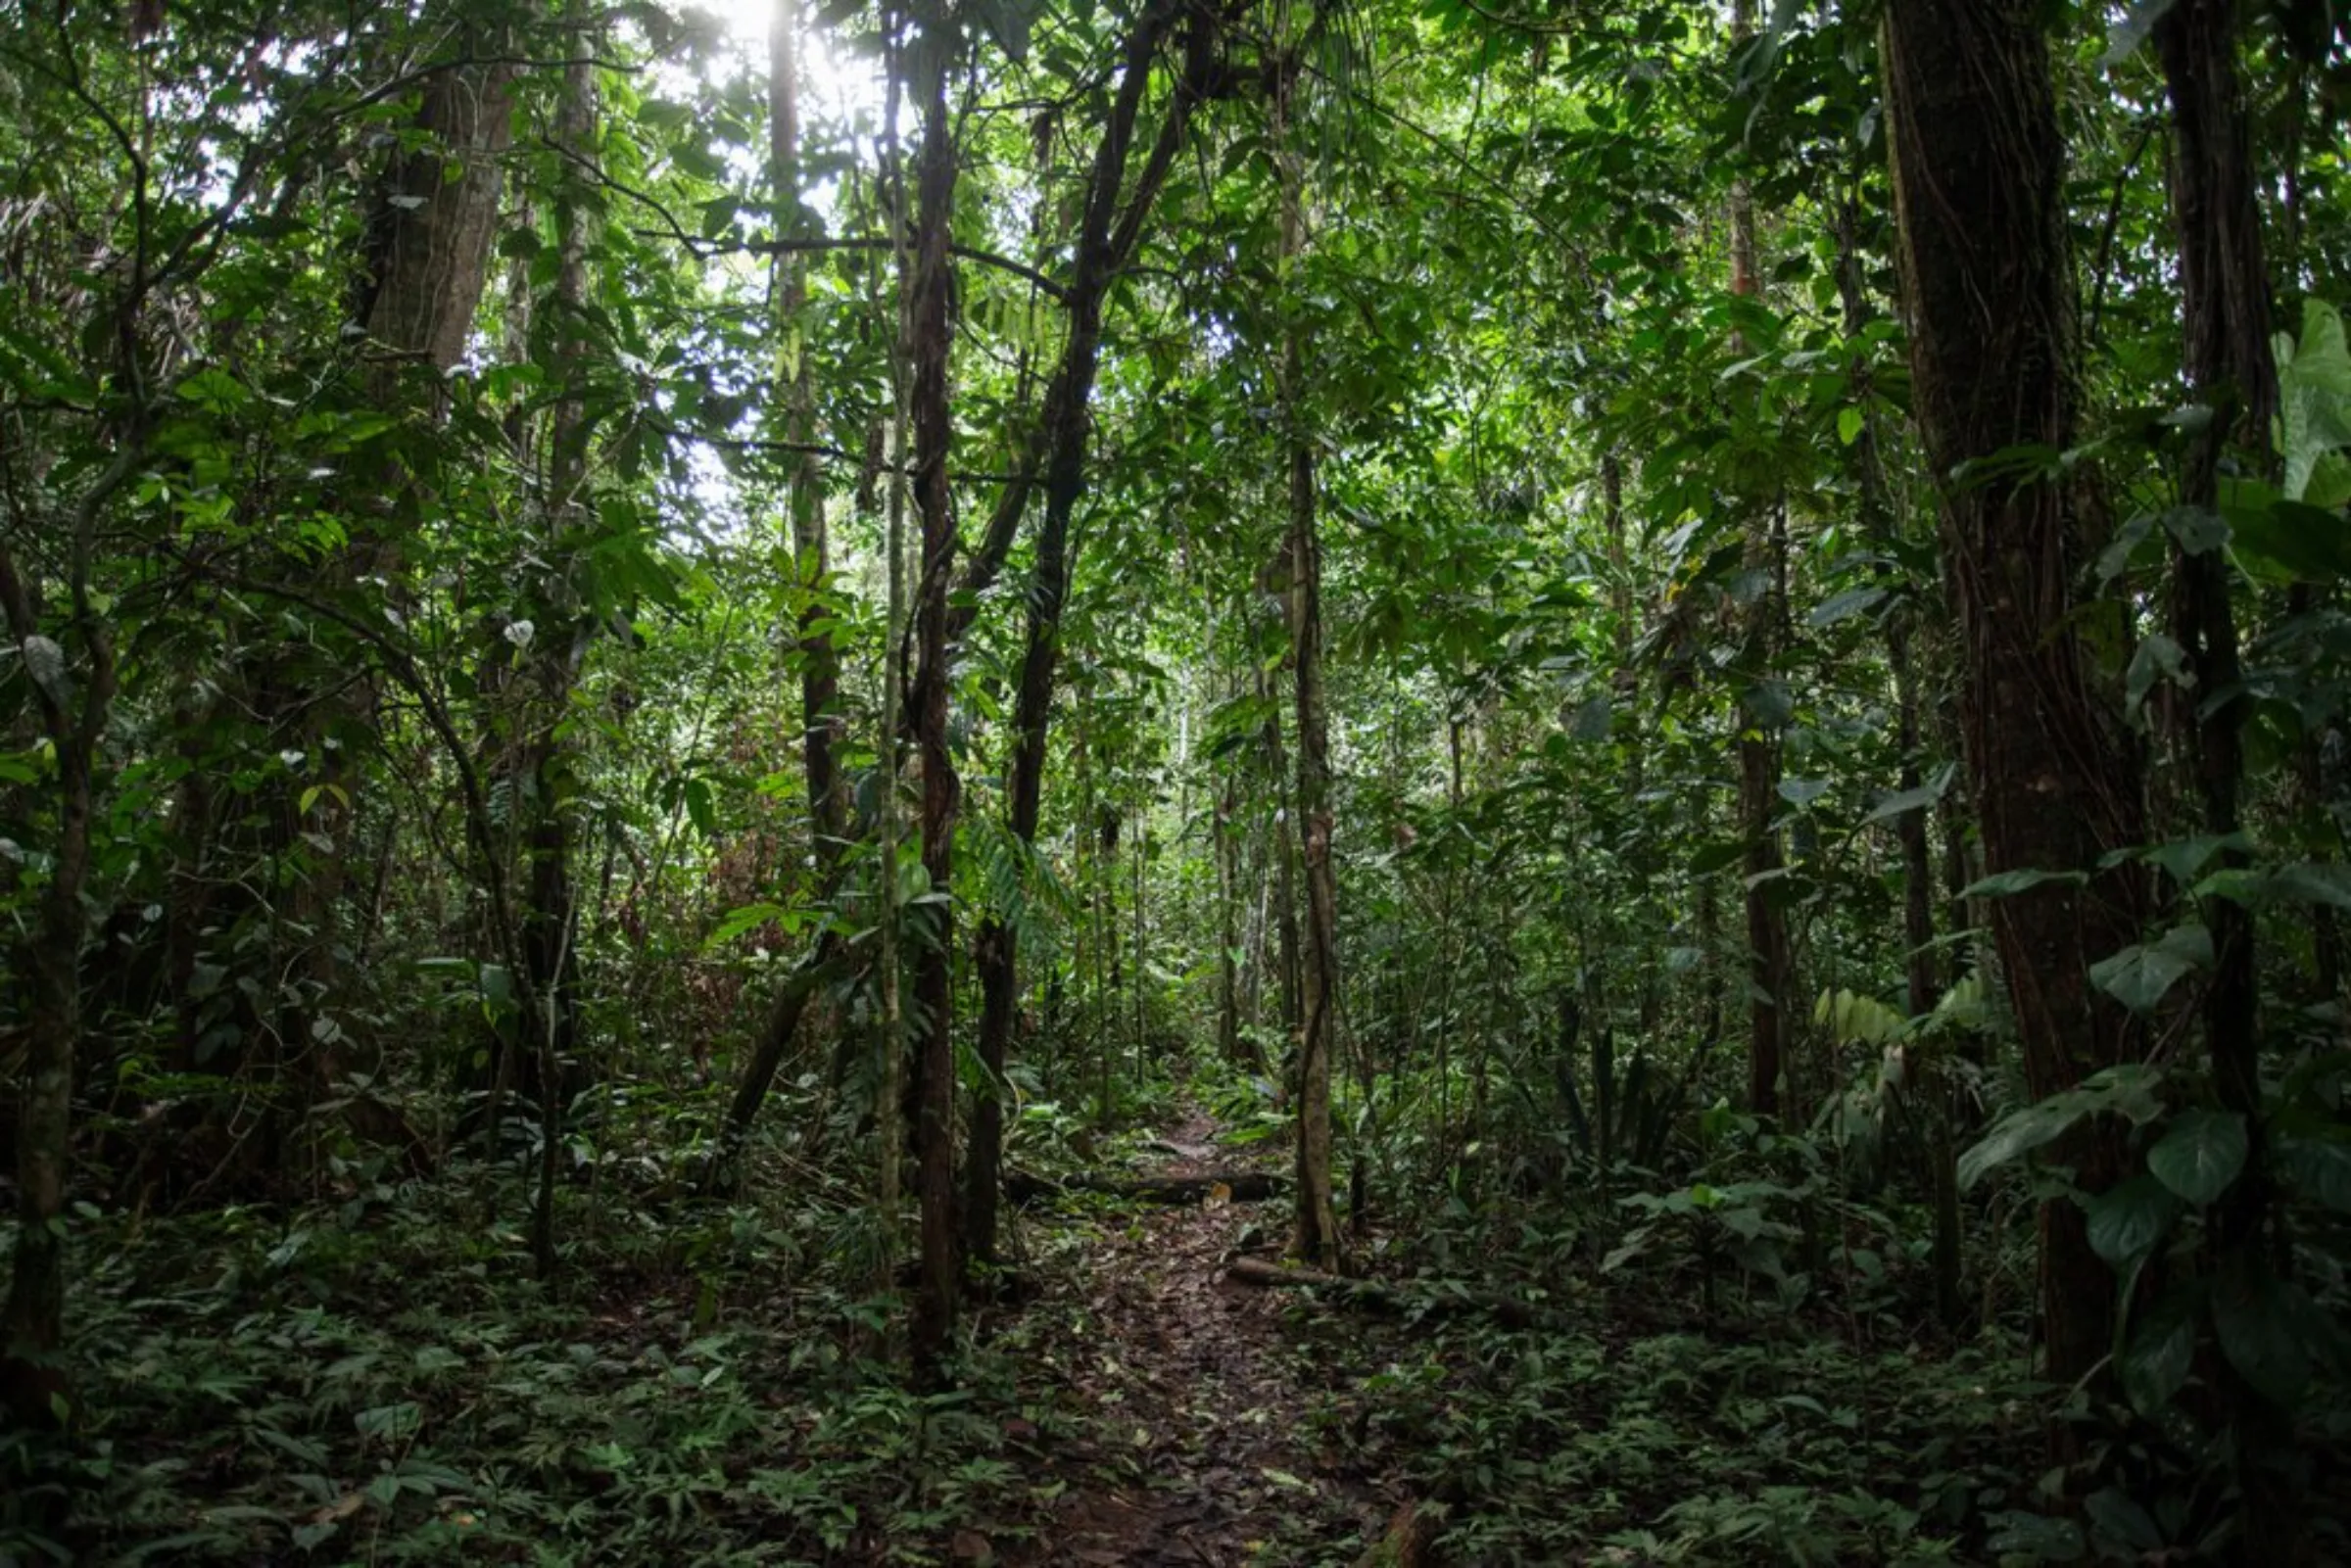 A path used by the indigenous Pastaza Waorani people in Ecuador’s Pastaza province, winds through the Amazon rainforest, April 25, 2022